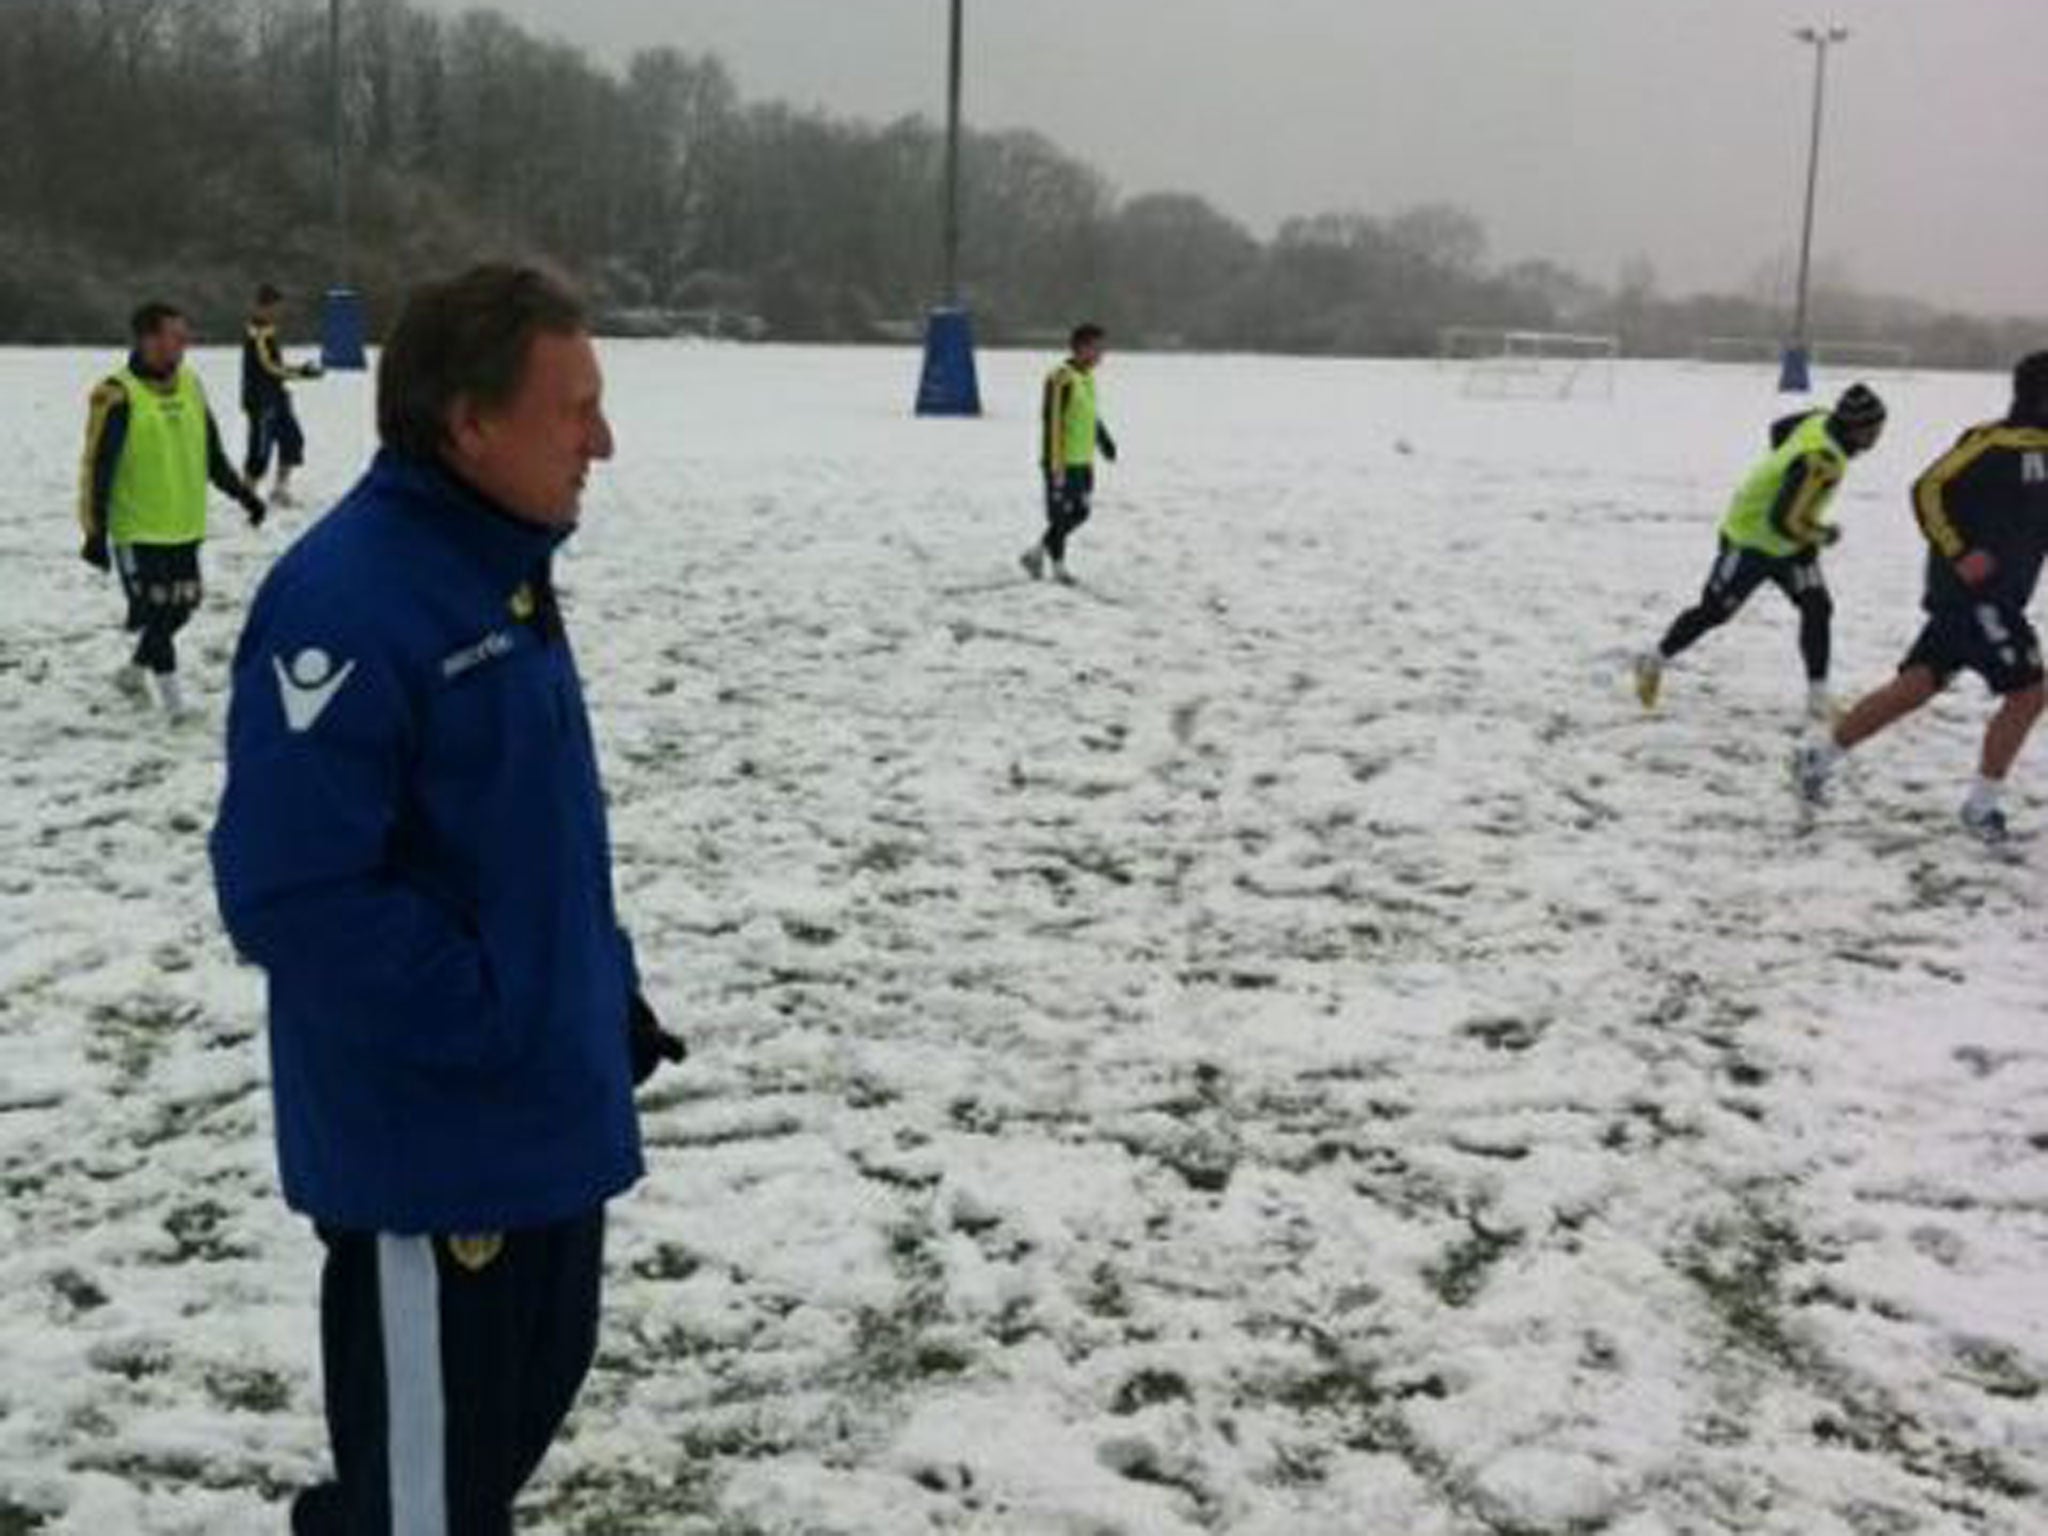 Neil Warnock watches over training during the snow